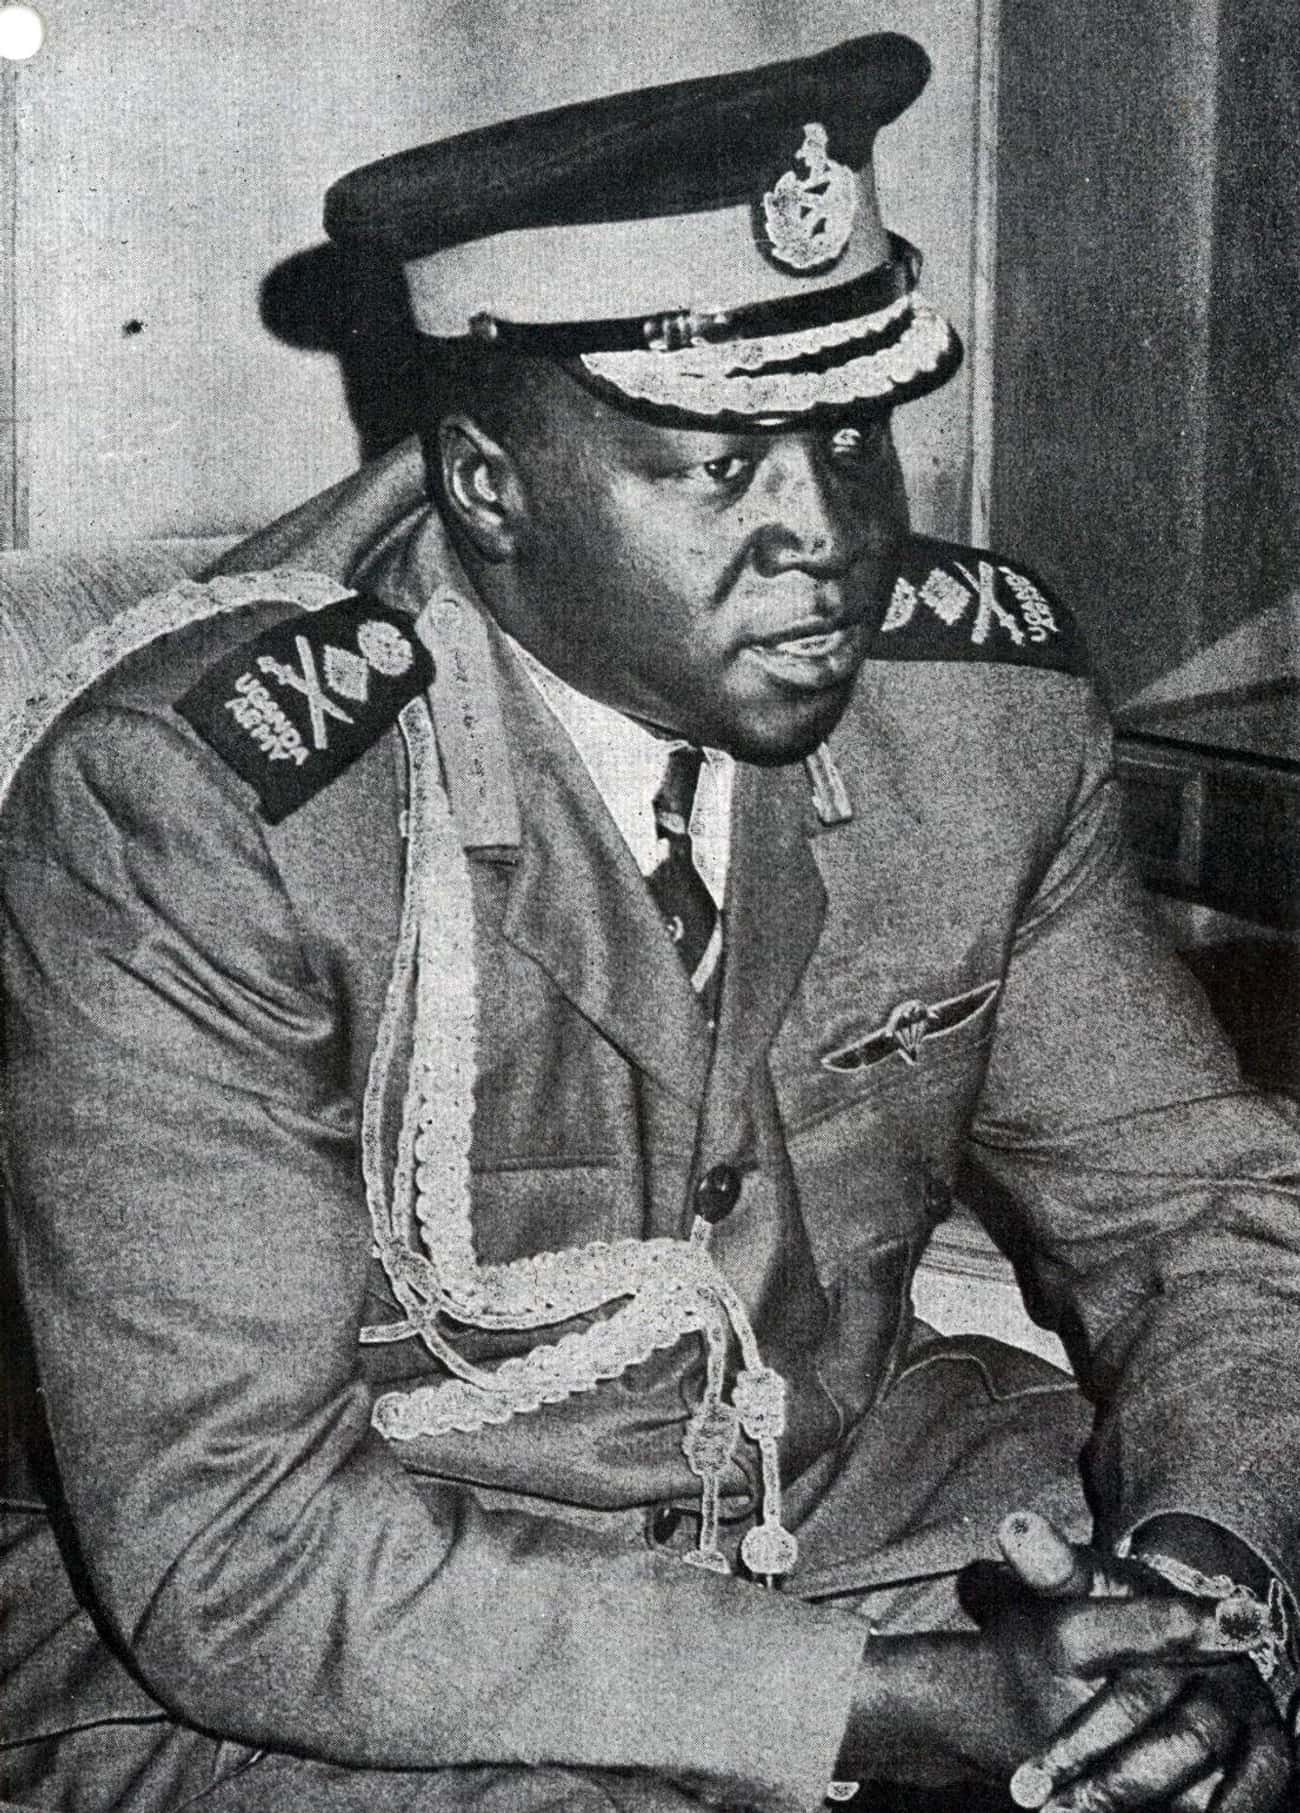 Idi Amin, Ugandan Despot Who Wiped Out Hundreds Of Thousands, Eventually Succumbed To Syphilis